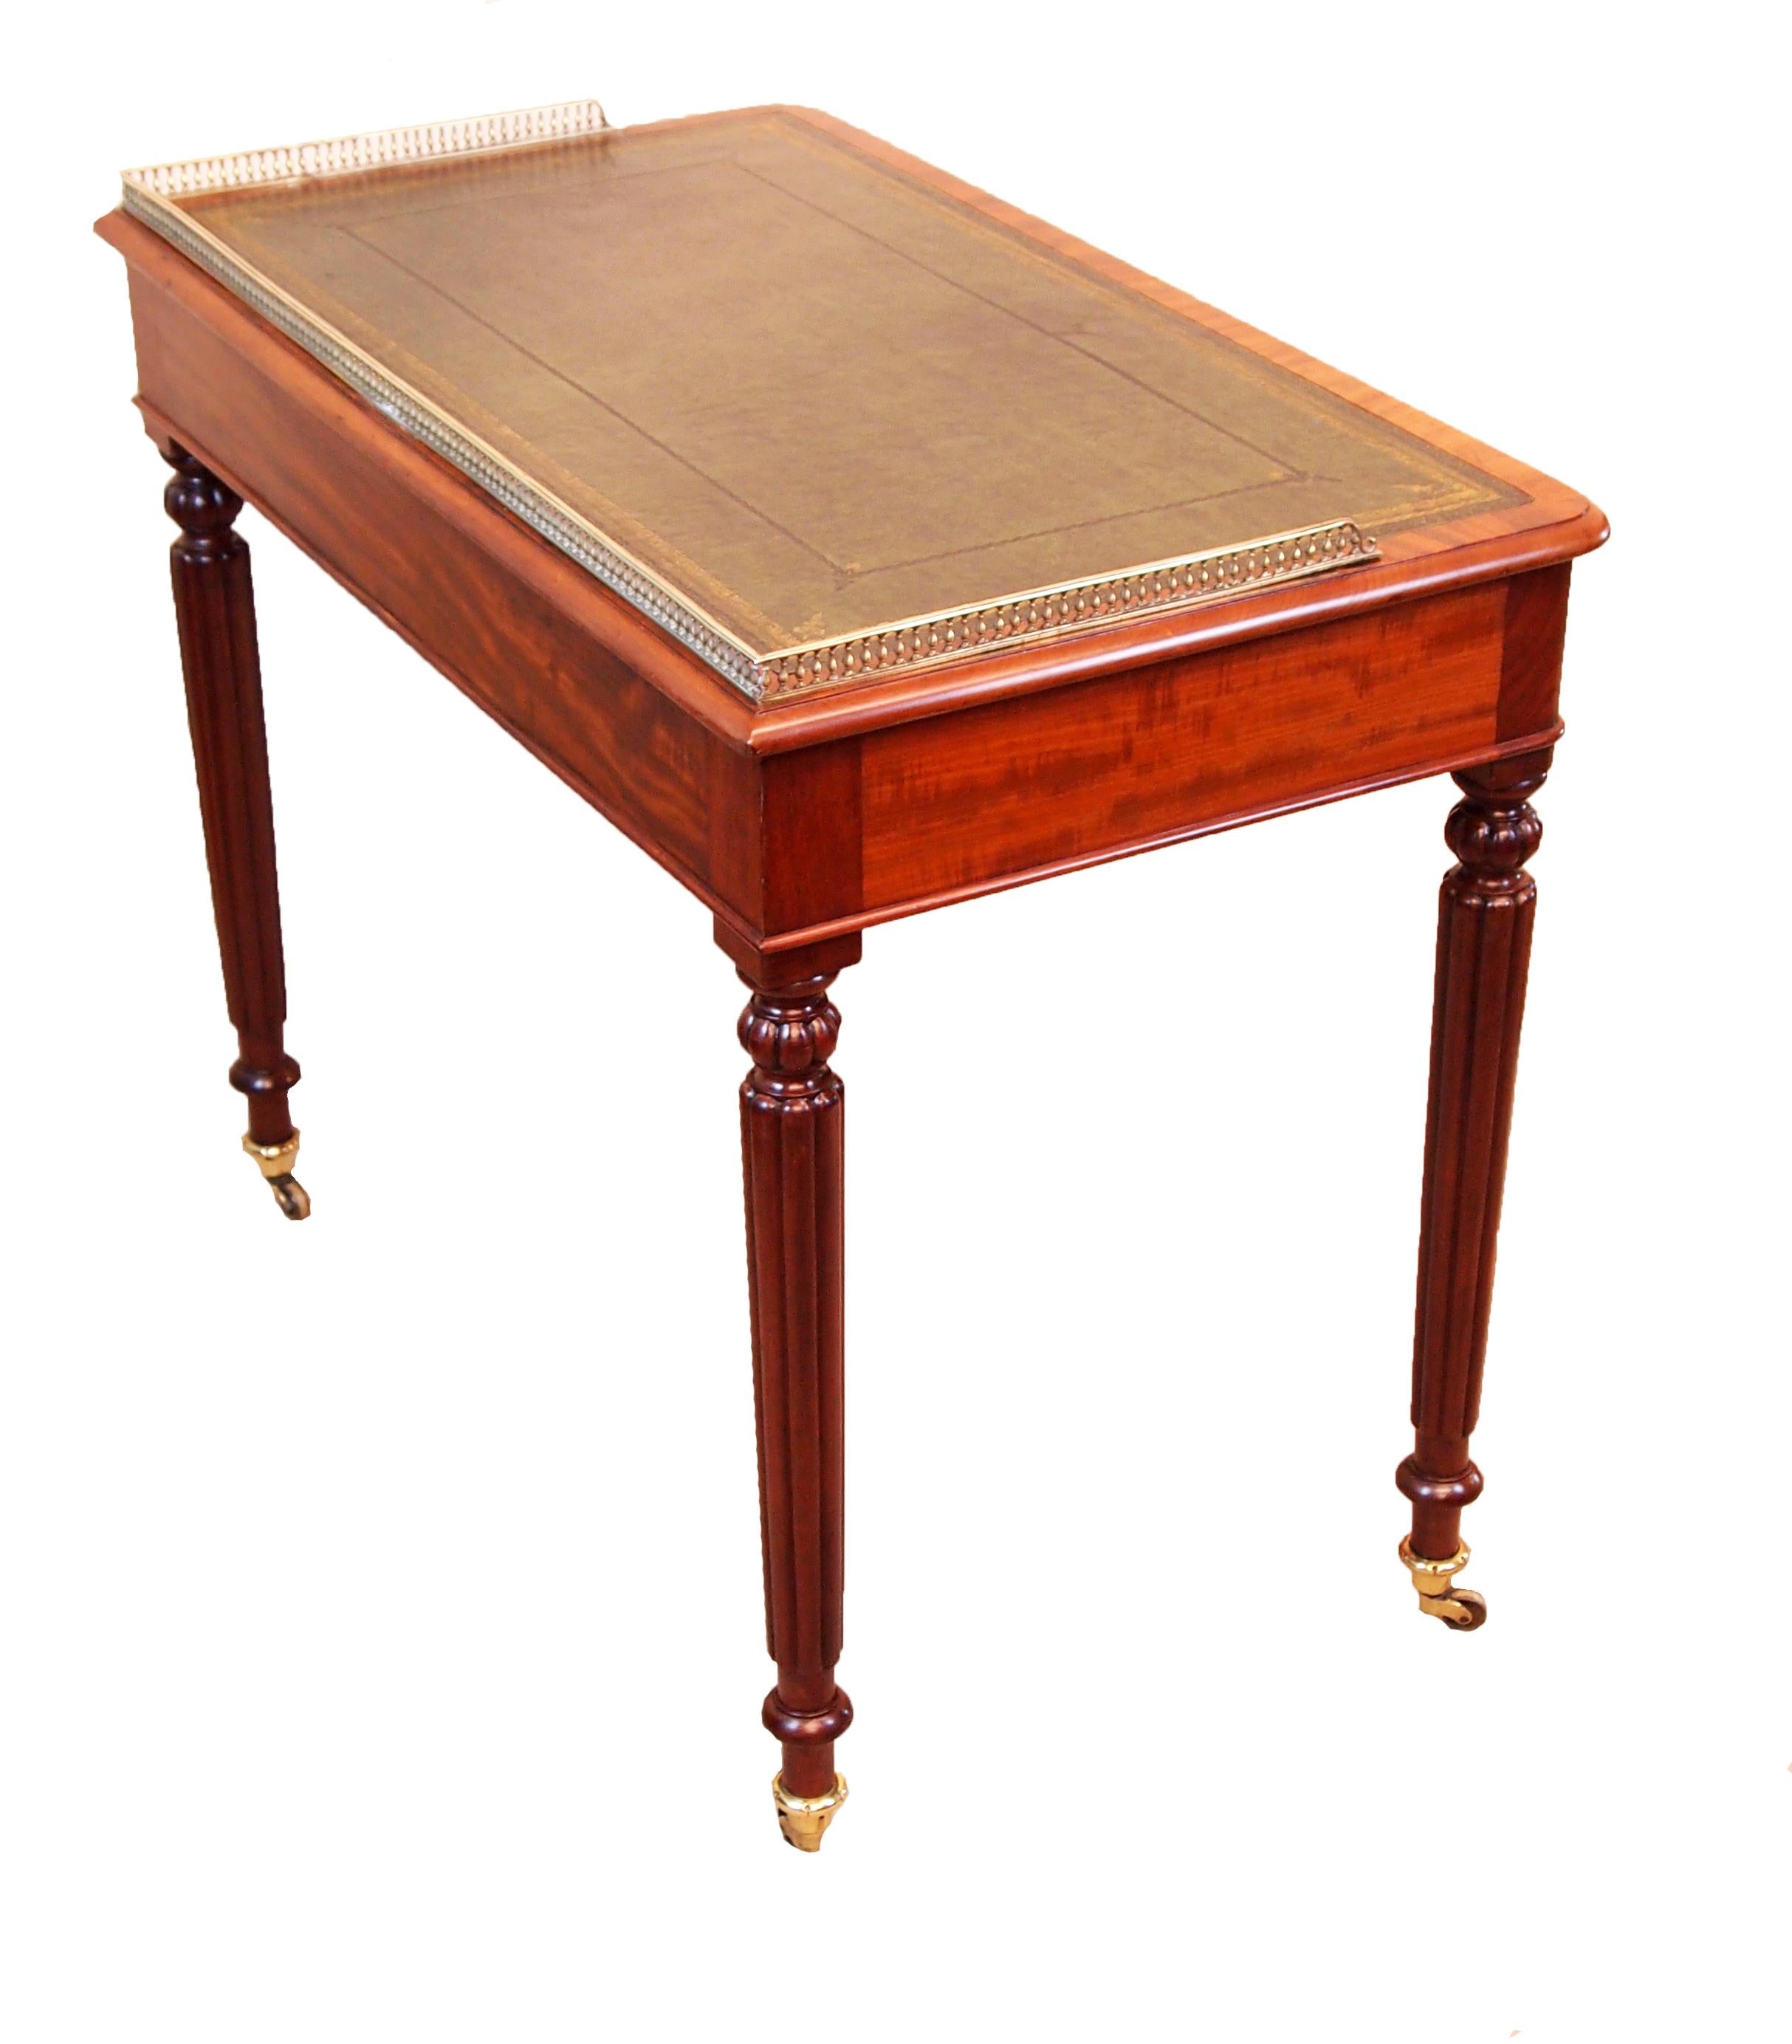 An excellent quality mid-19th century mahogany writing
Table of particularly small proportion having attractive brass
Galleried top with replacement inset gilt tooled leather
Above two frieze drawers with turned brass knobs raised
On elegant